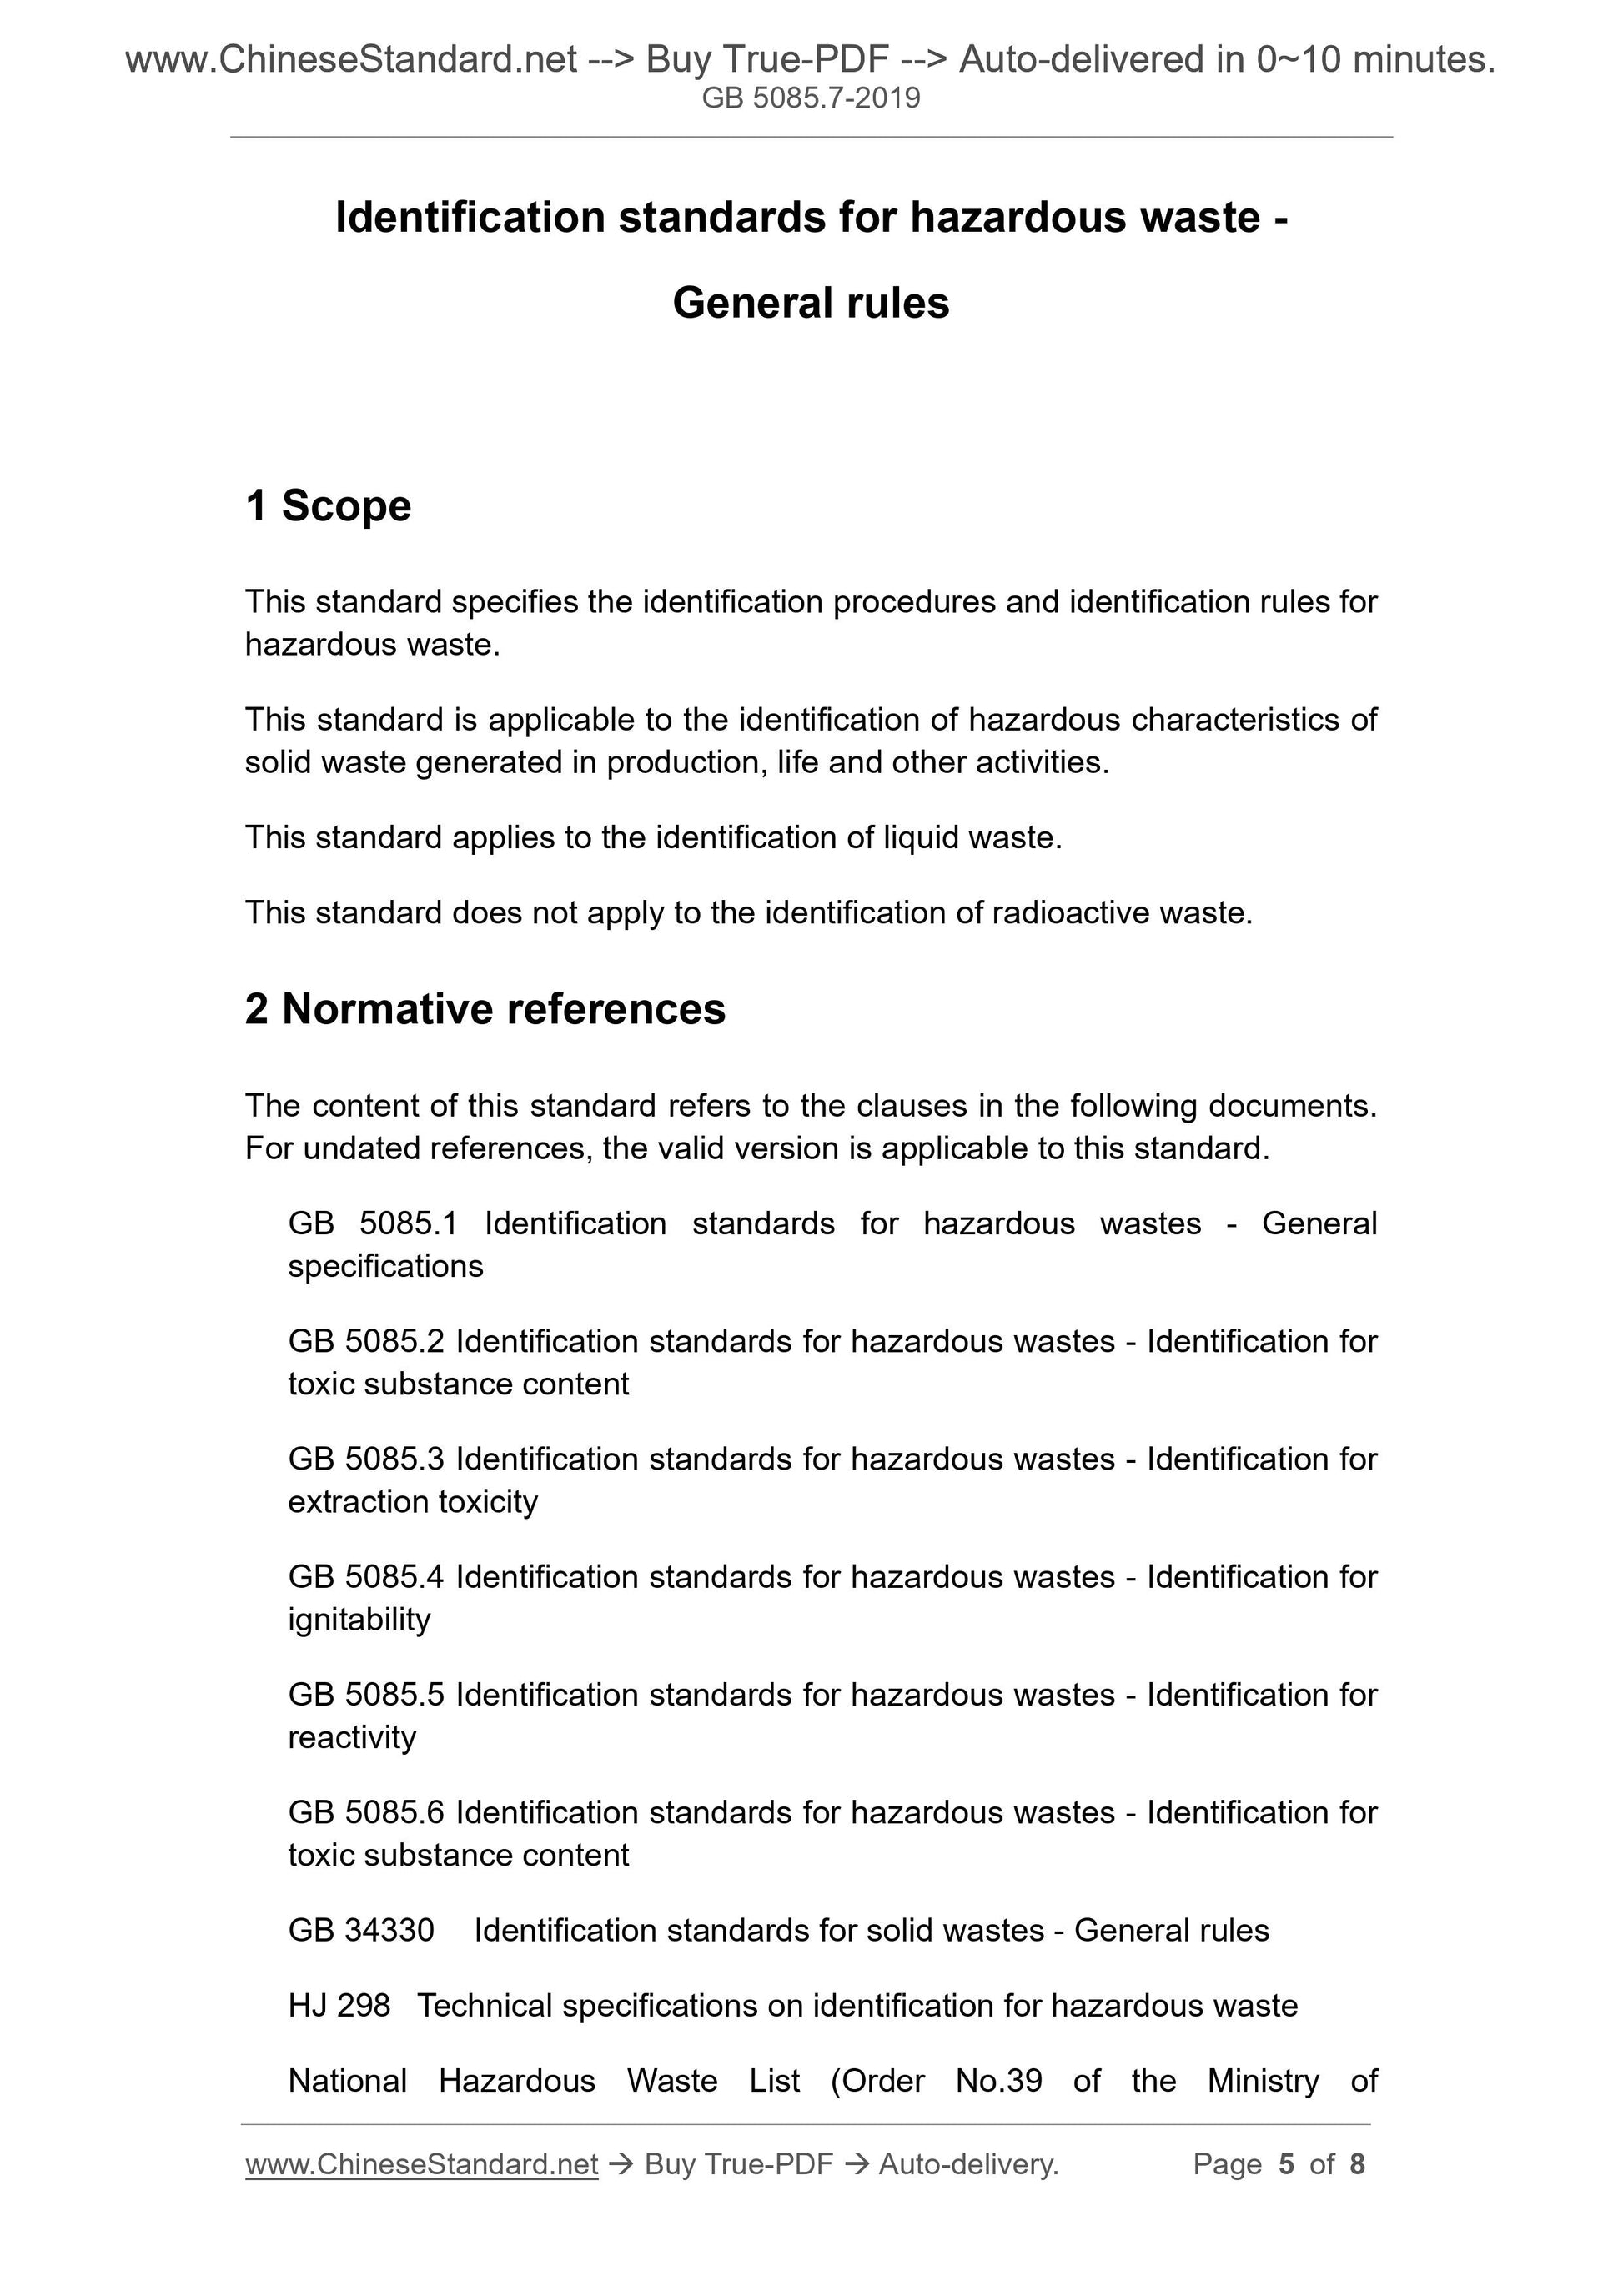 GB 5085.7-2019 Page 4